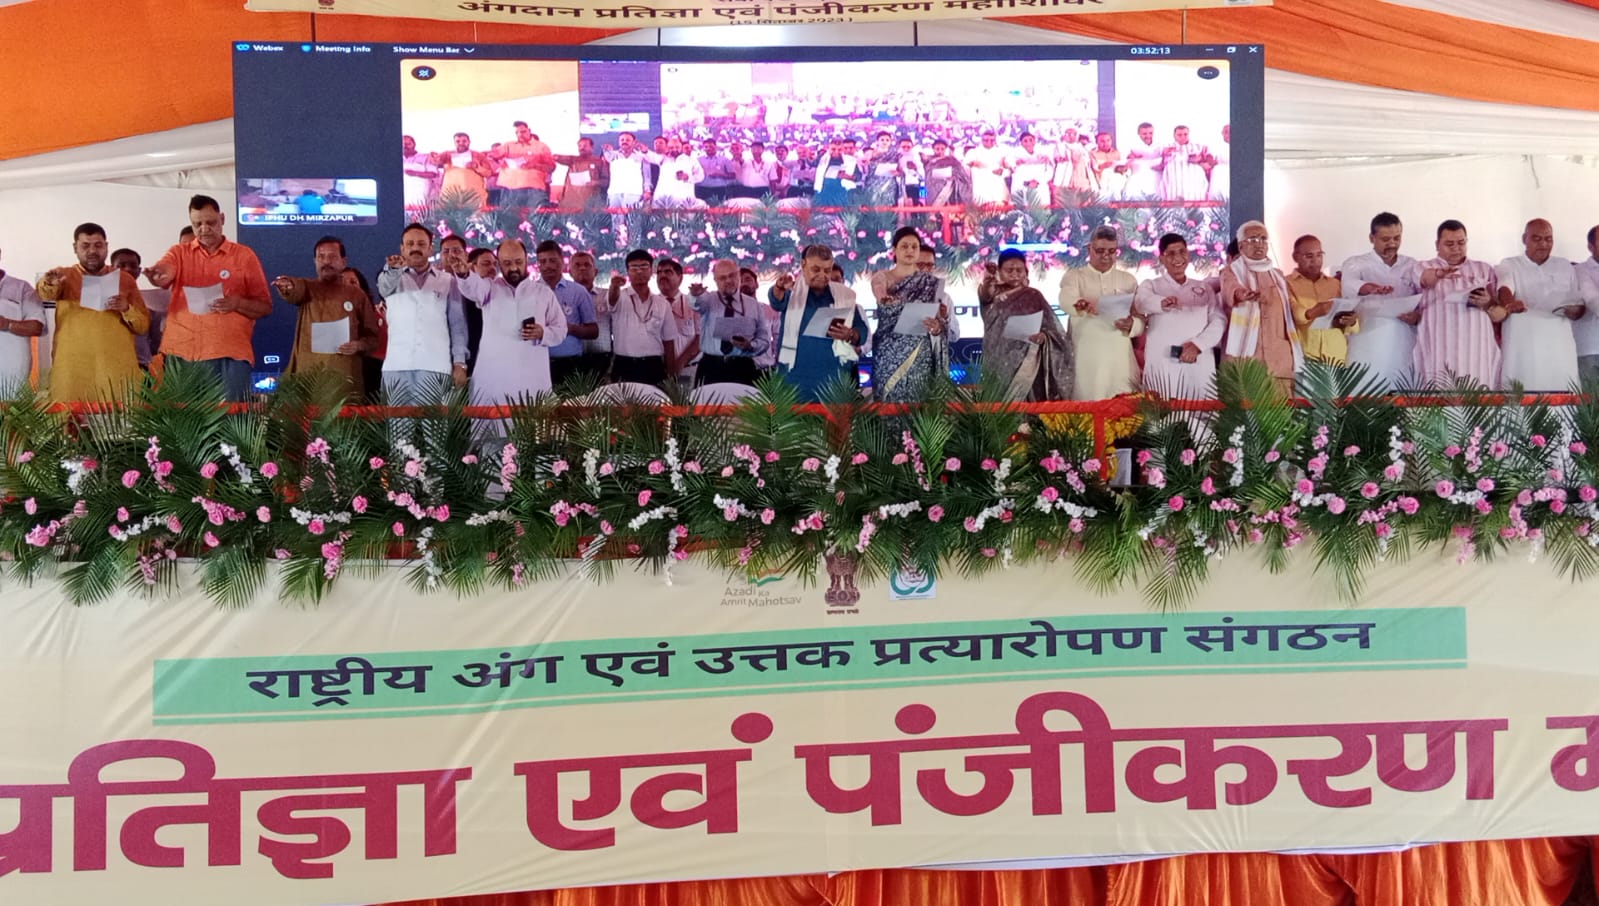 Health Minister Mansukh Mandaviya and Seven Thousand citizens register for organ and tissue donation in Agra